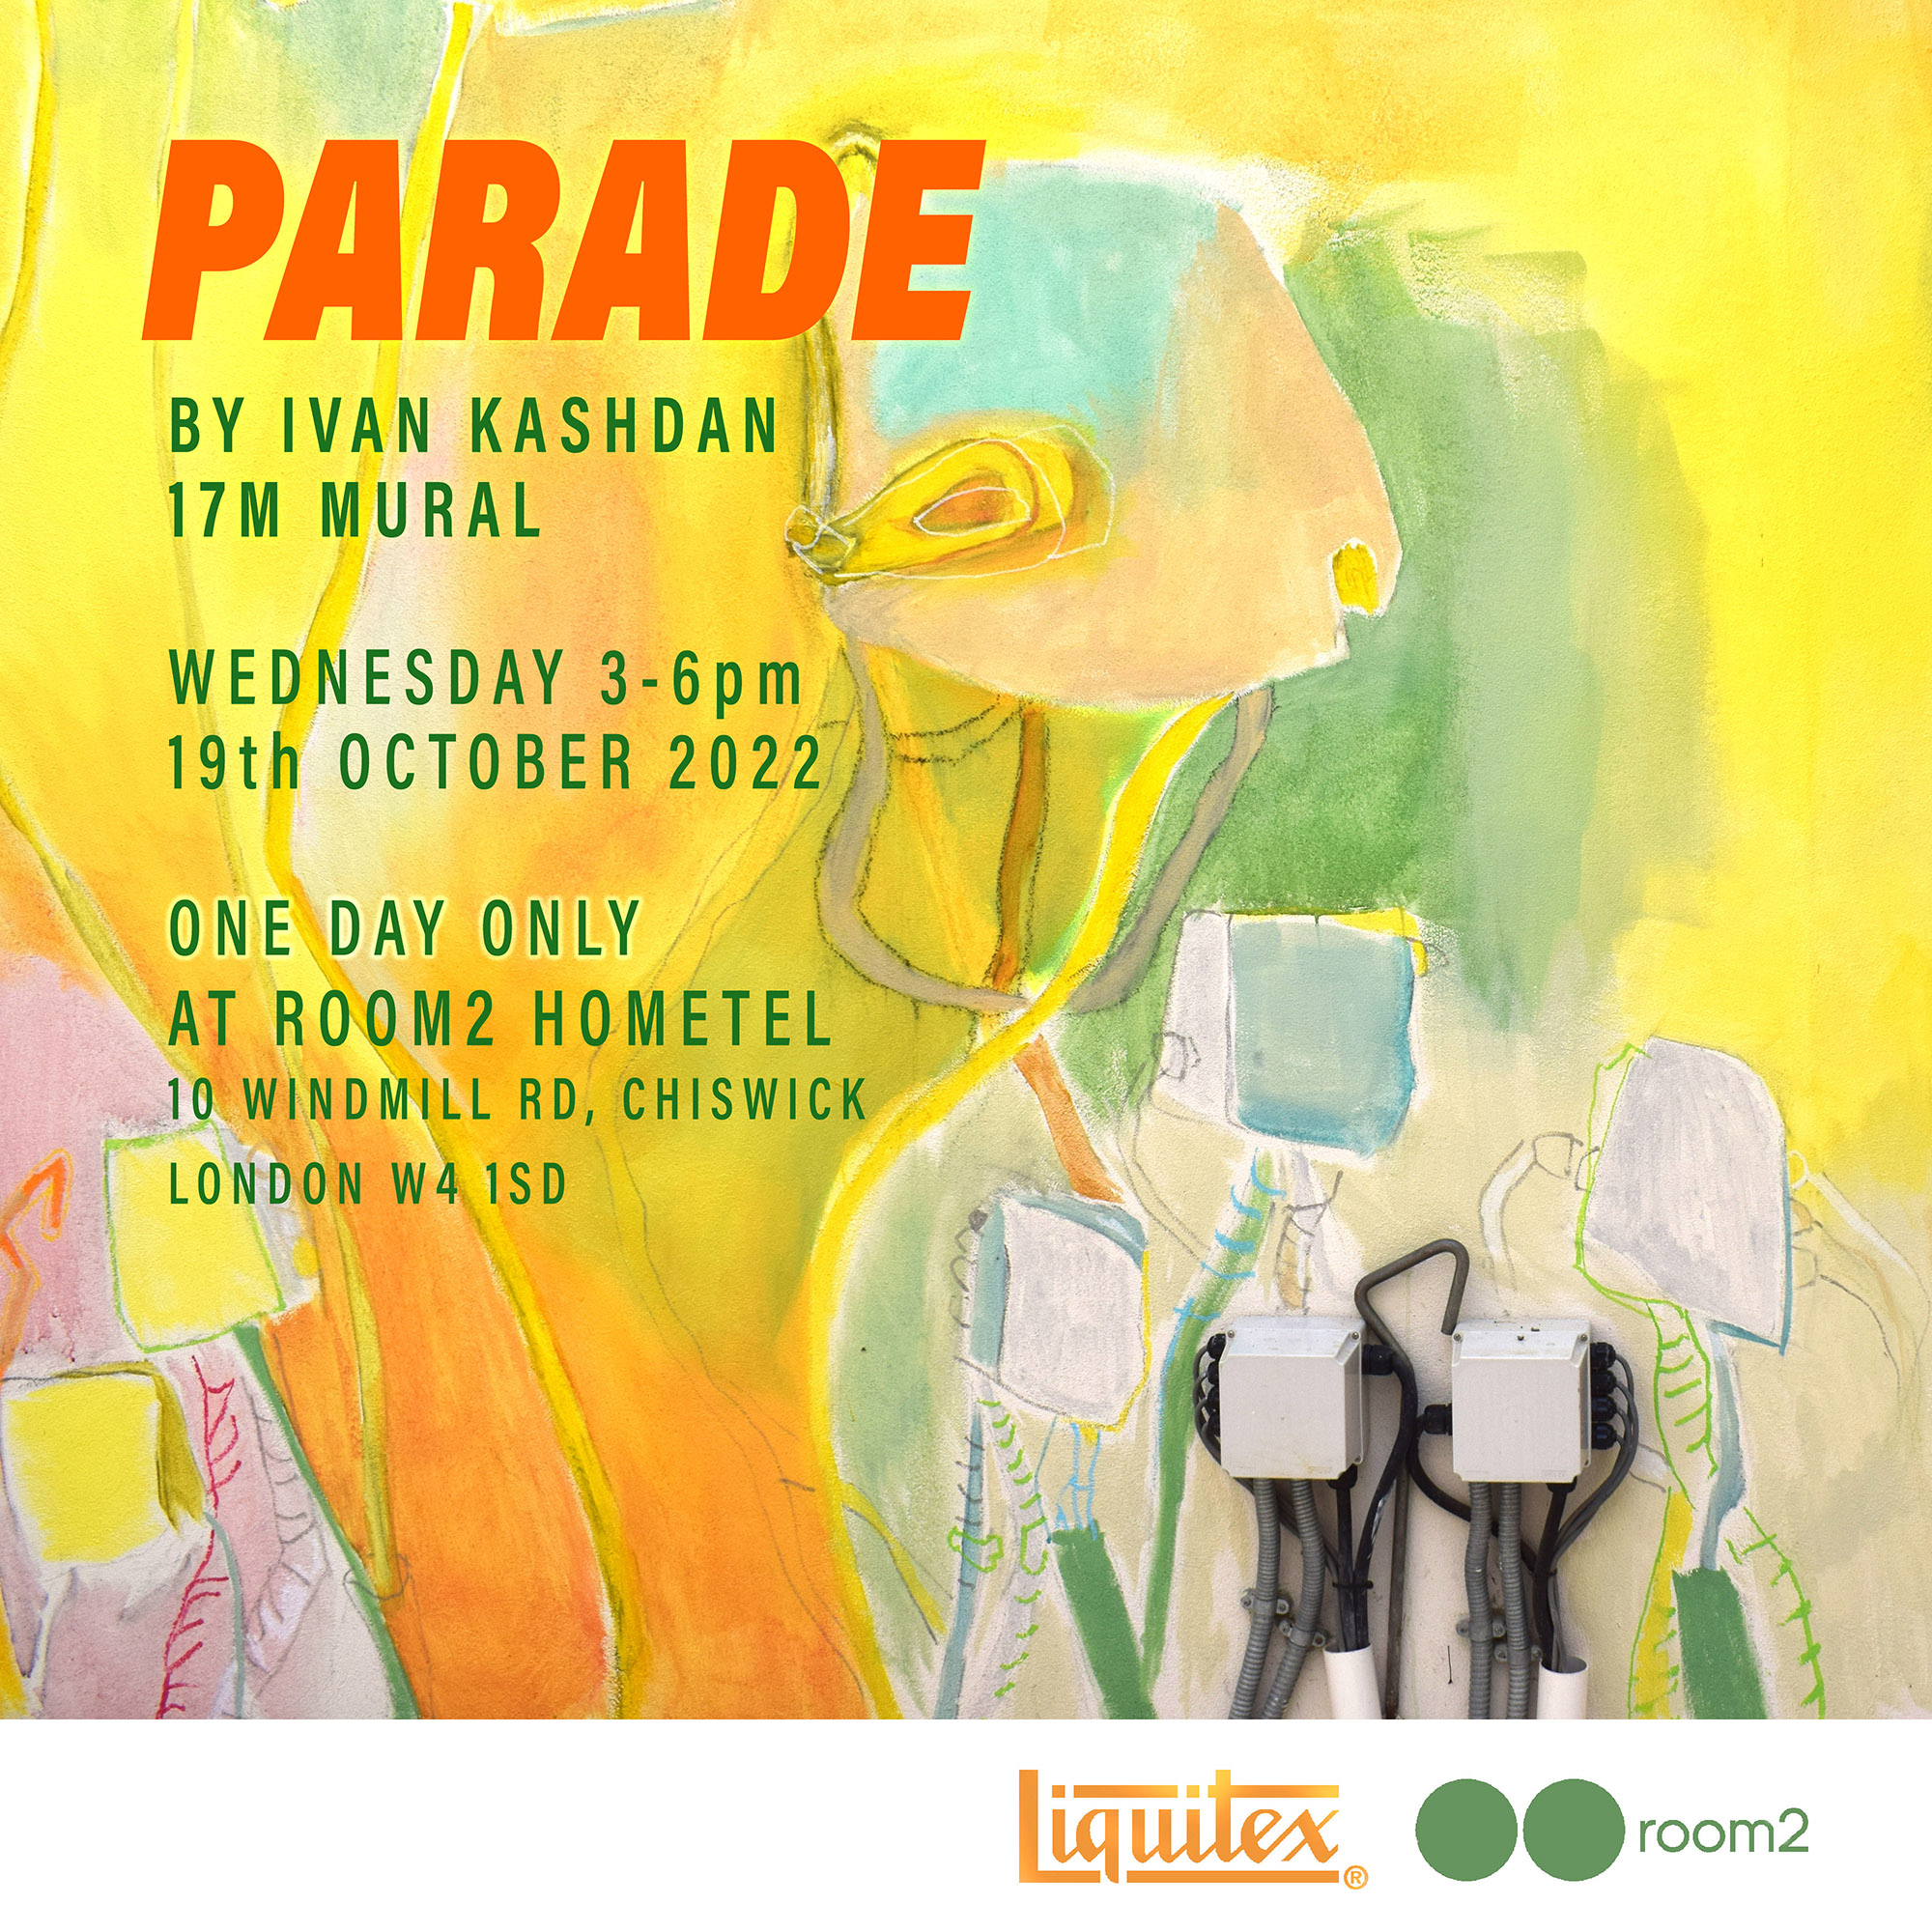 Poster for Parade by Ivan Kashdan